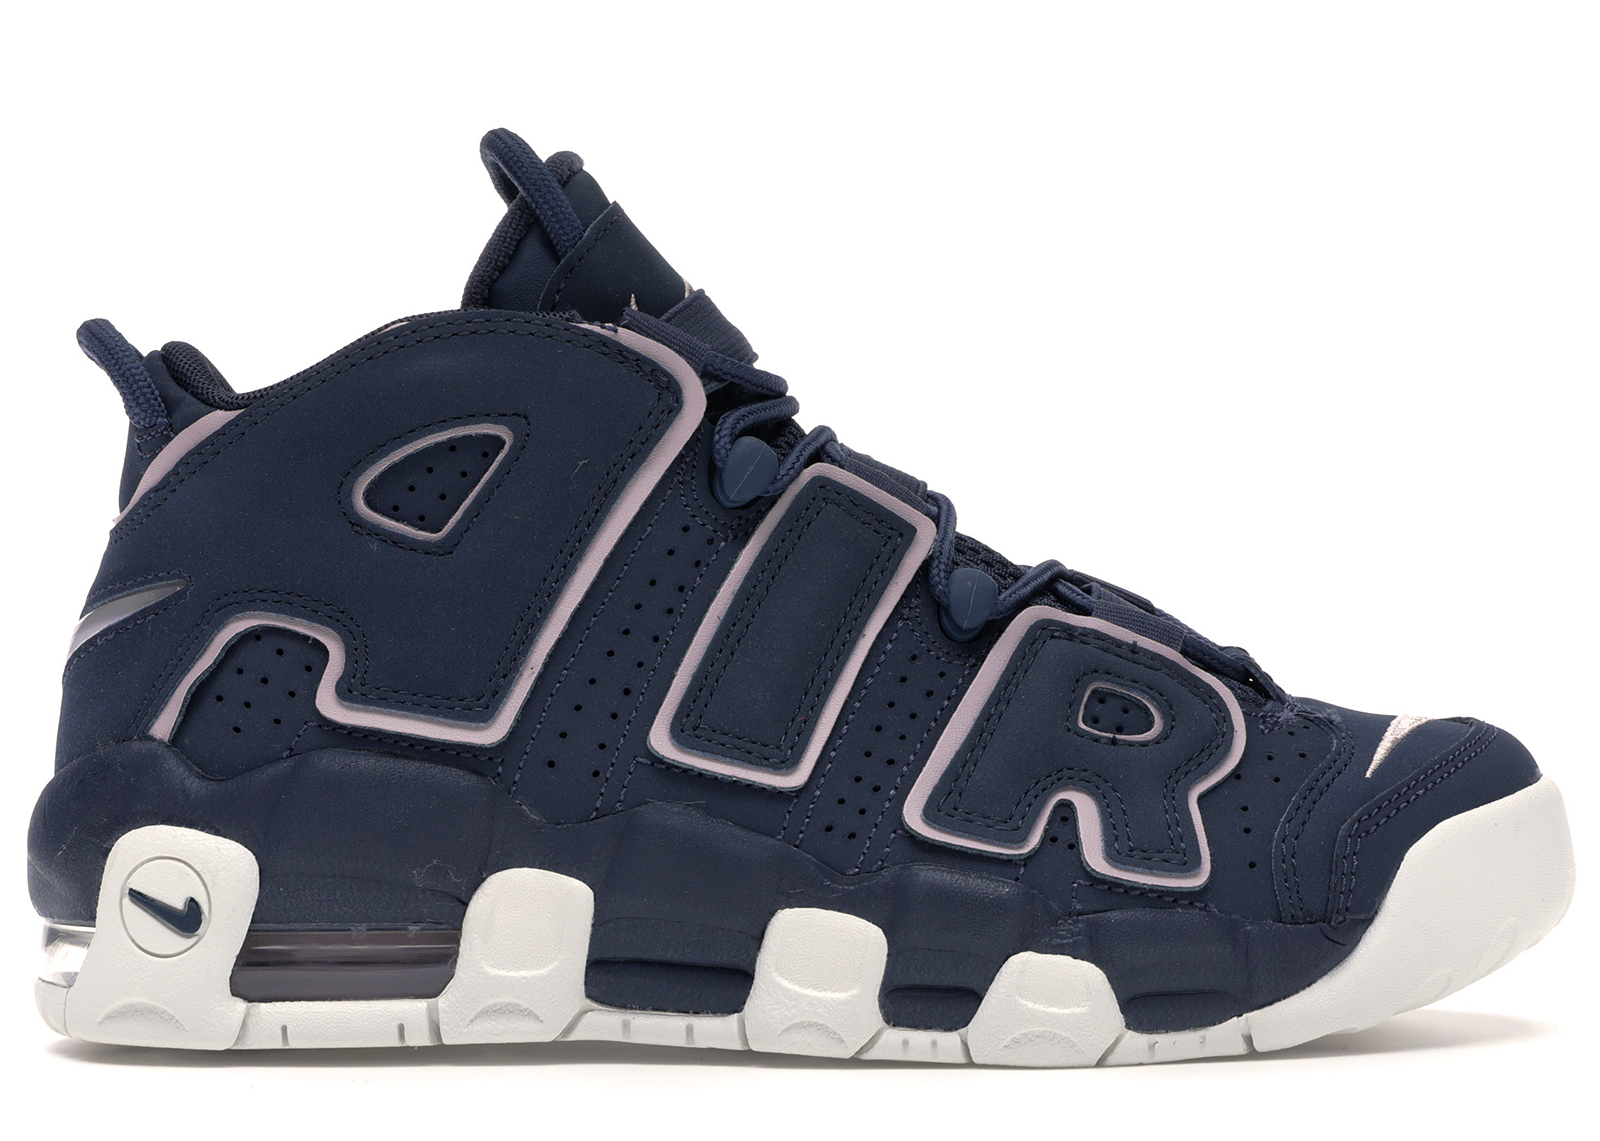 Nike Air More Uptempo Thunder Blue (GS) キッズ - 415082-402 - JP